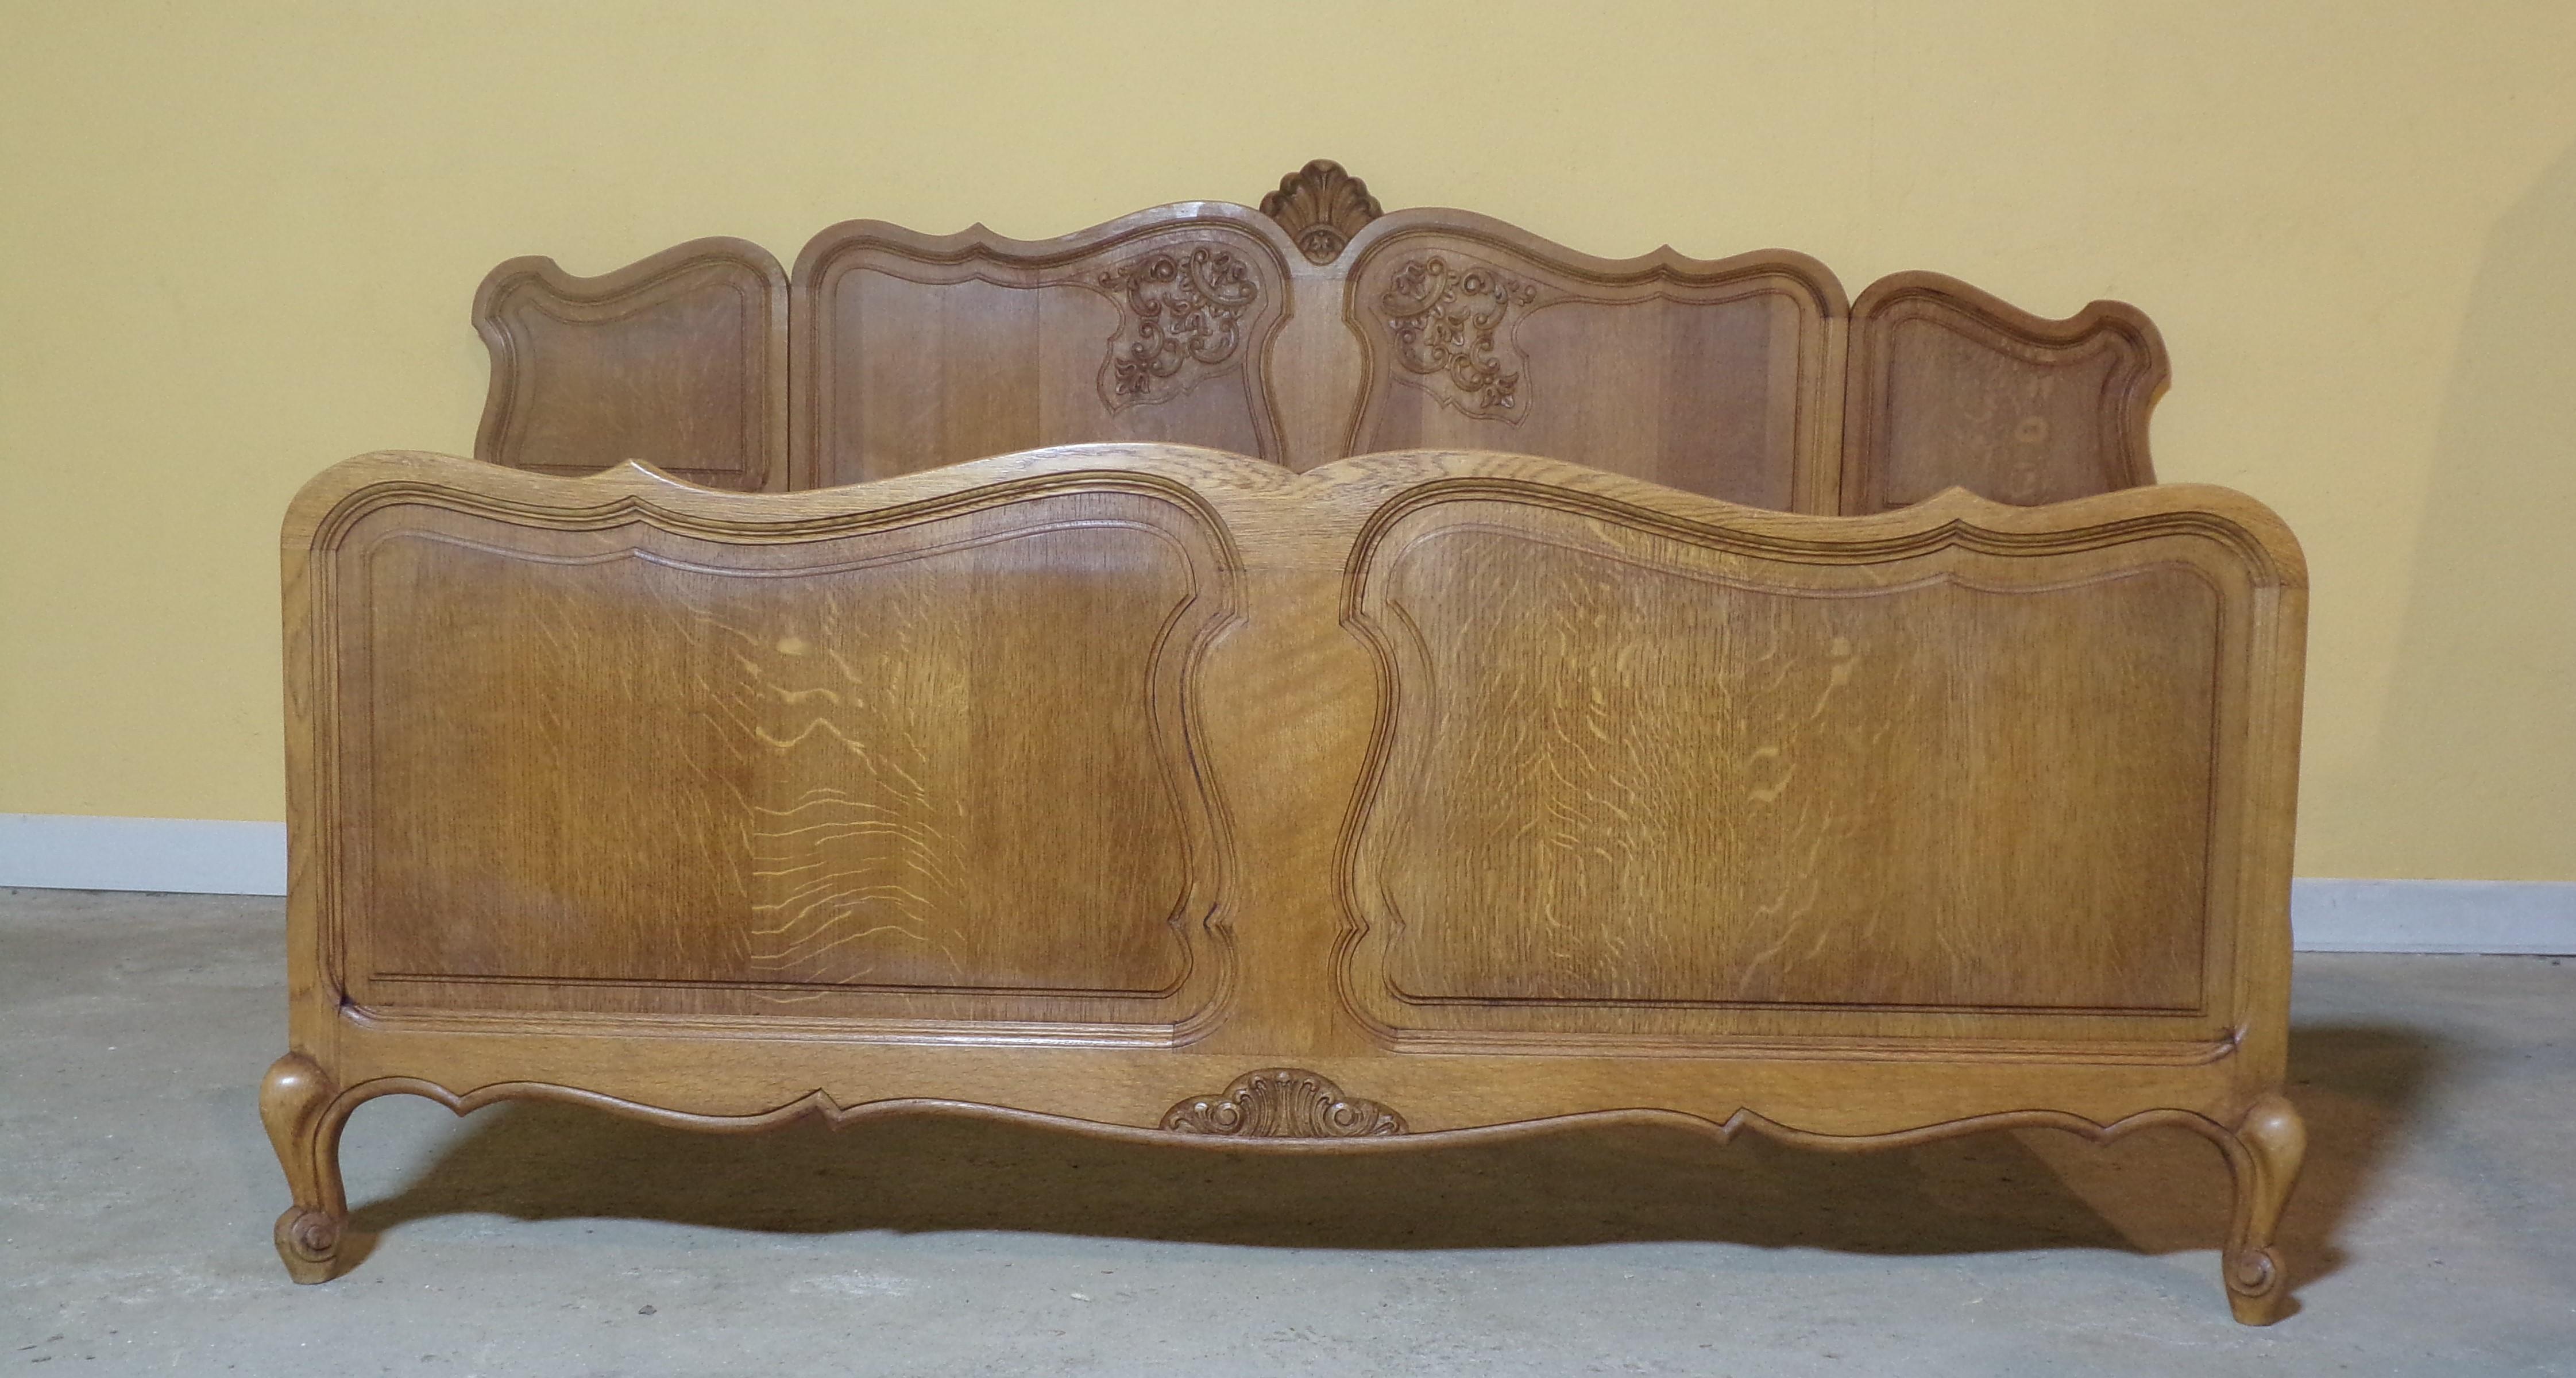 A most unusual French hand carved Double bed with 